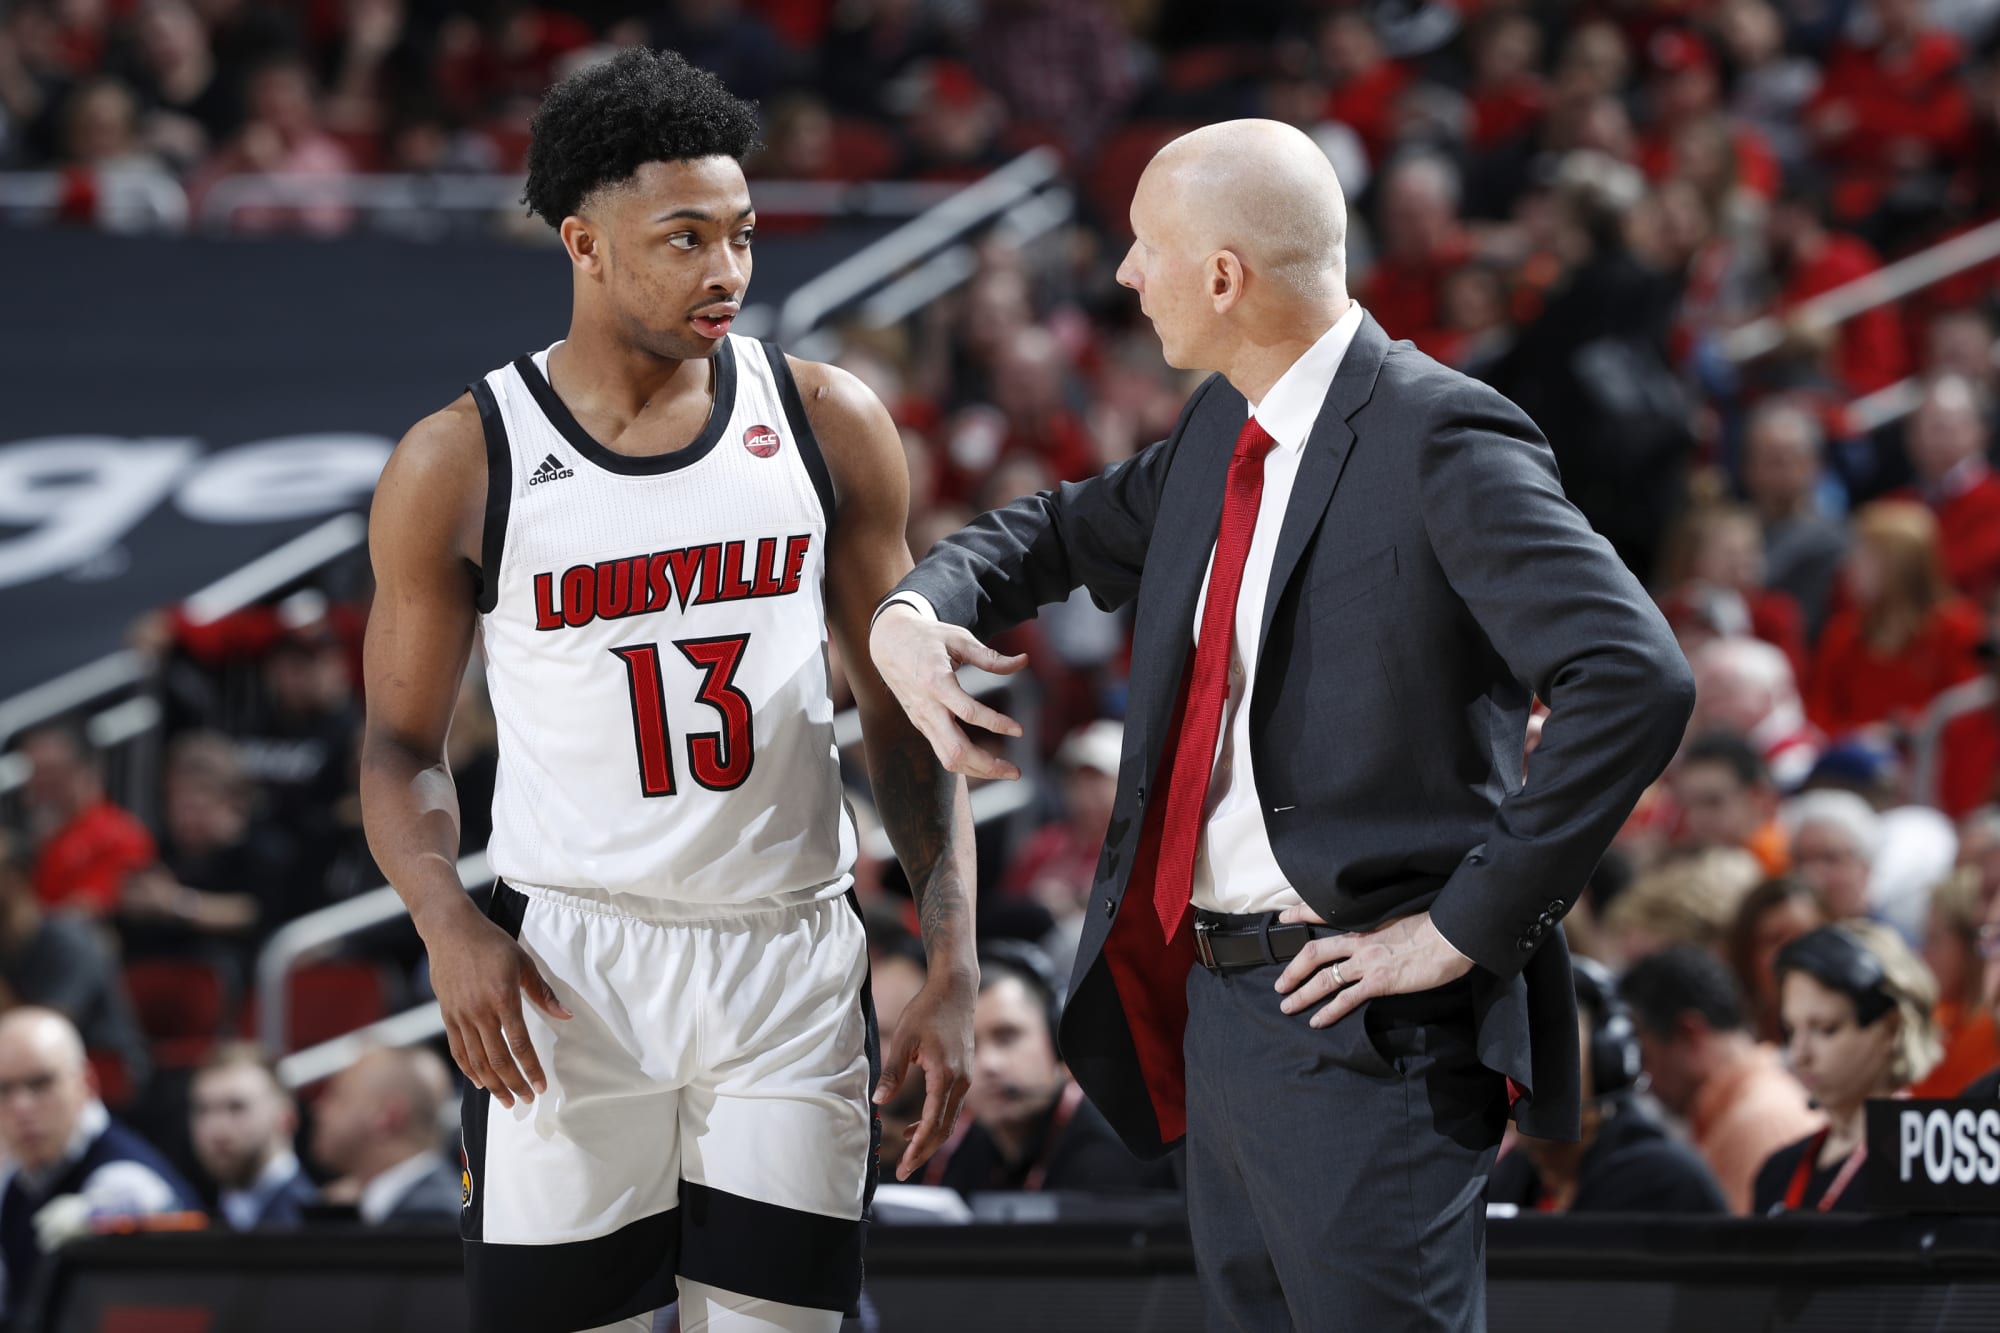 Louisville basketball: Projected 2020-21 starting lineup 1.0 - Page 2